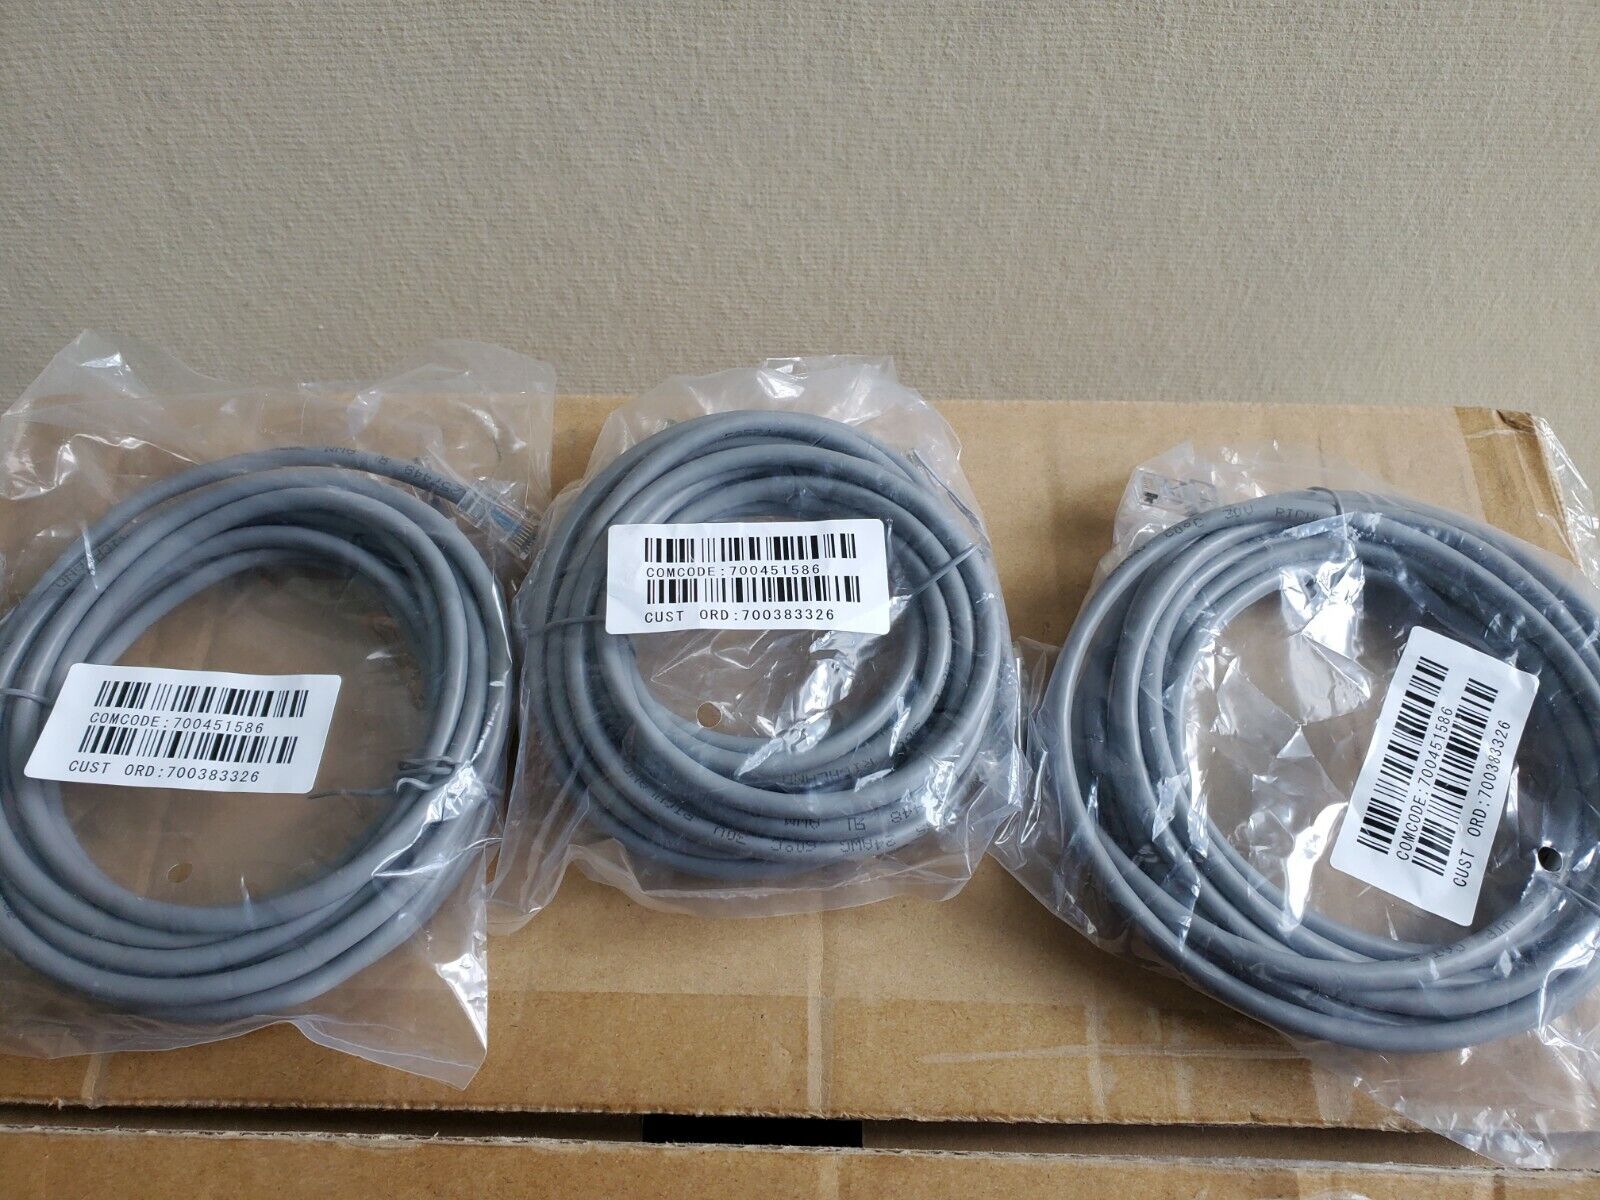 Pack of 12 Avaya CAT5E 14FT Ethernet Patch Cable / Line Cord 700451586 